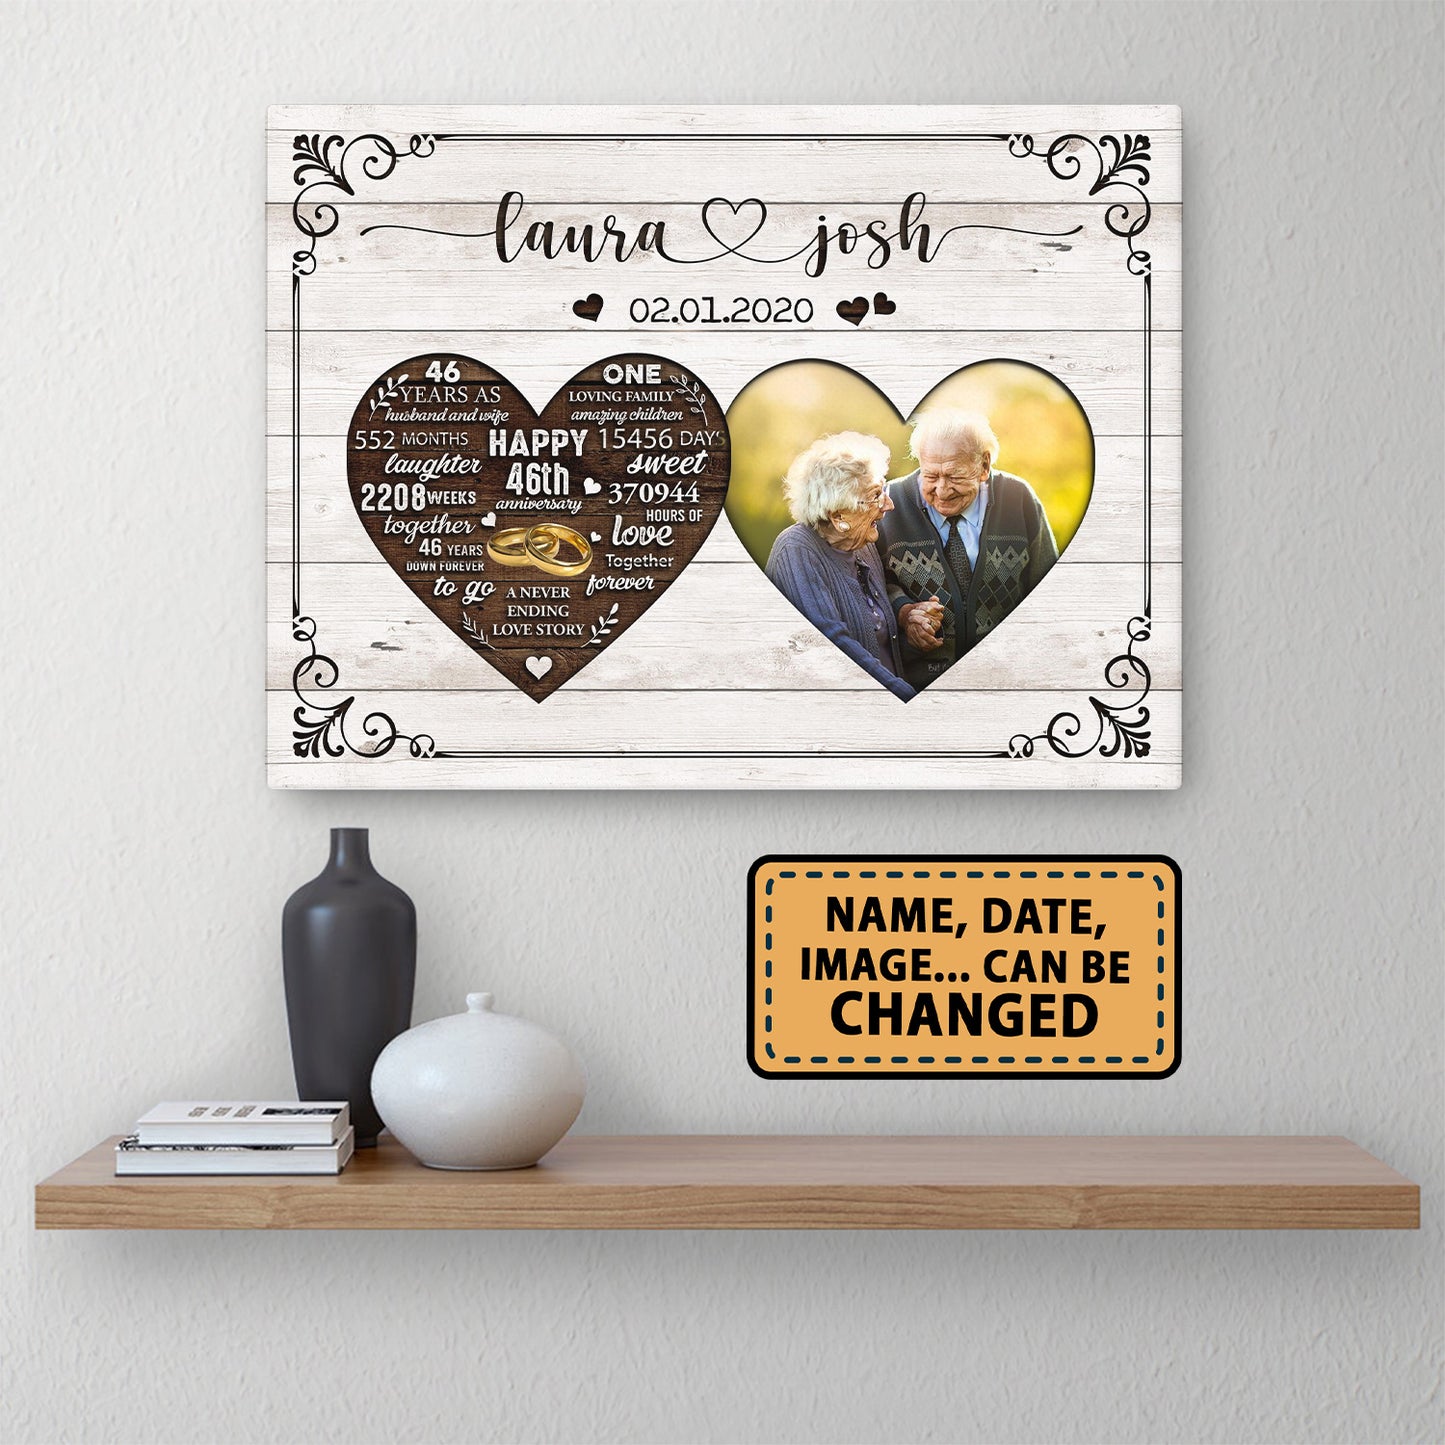 Happy 46th Anniversary As Husband And Wife Anniversary Canvas